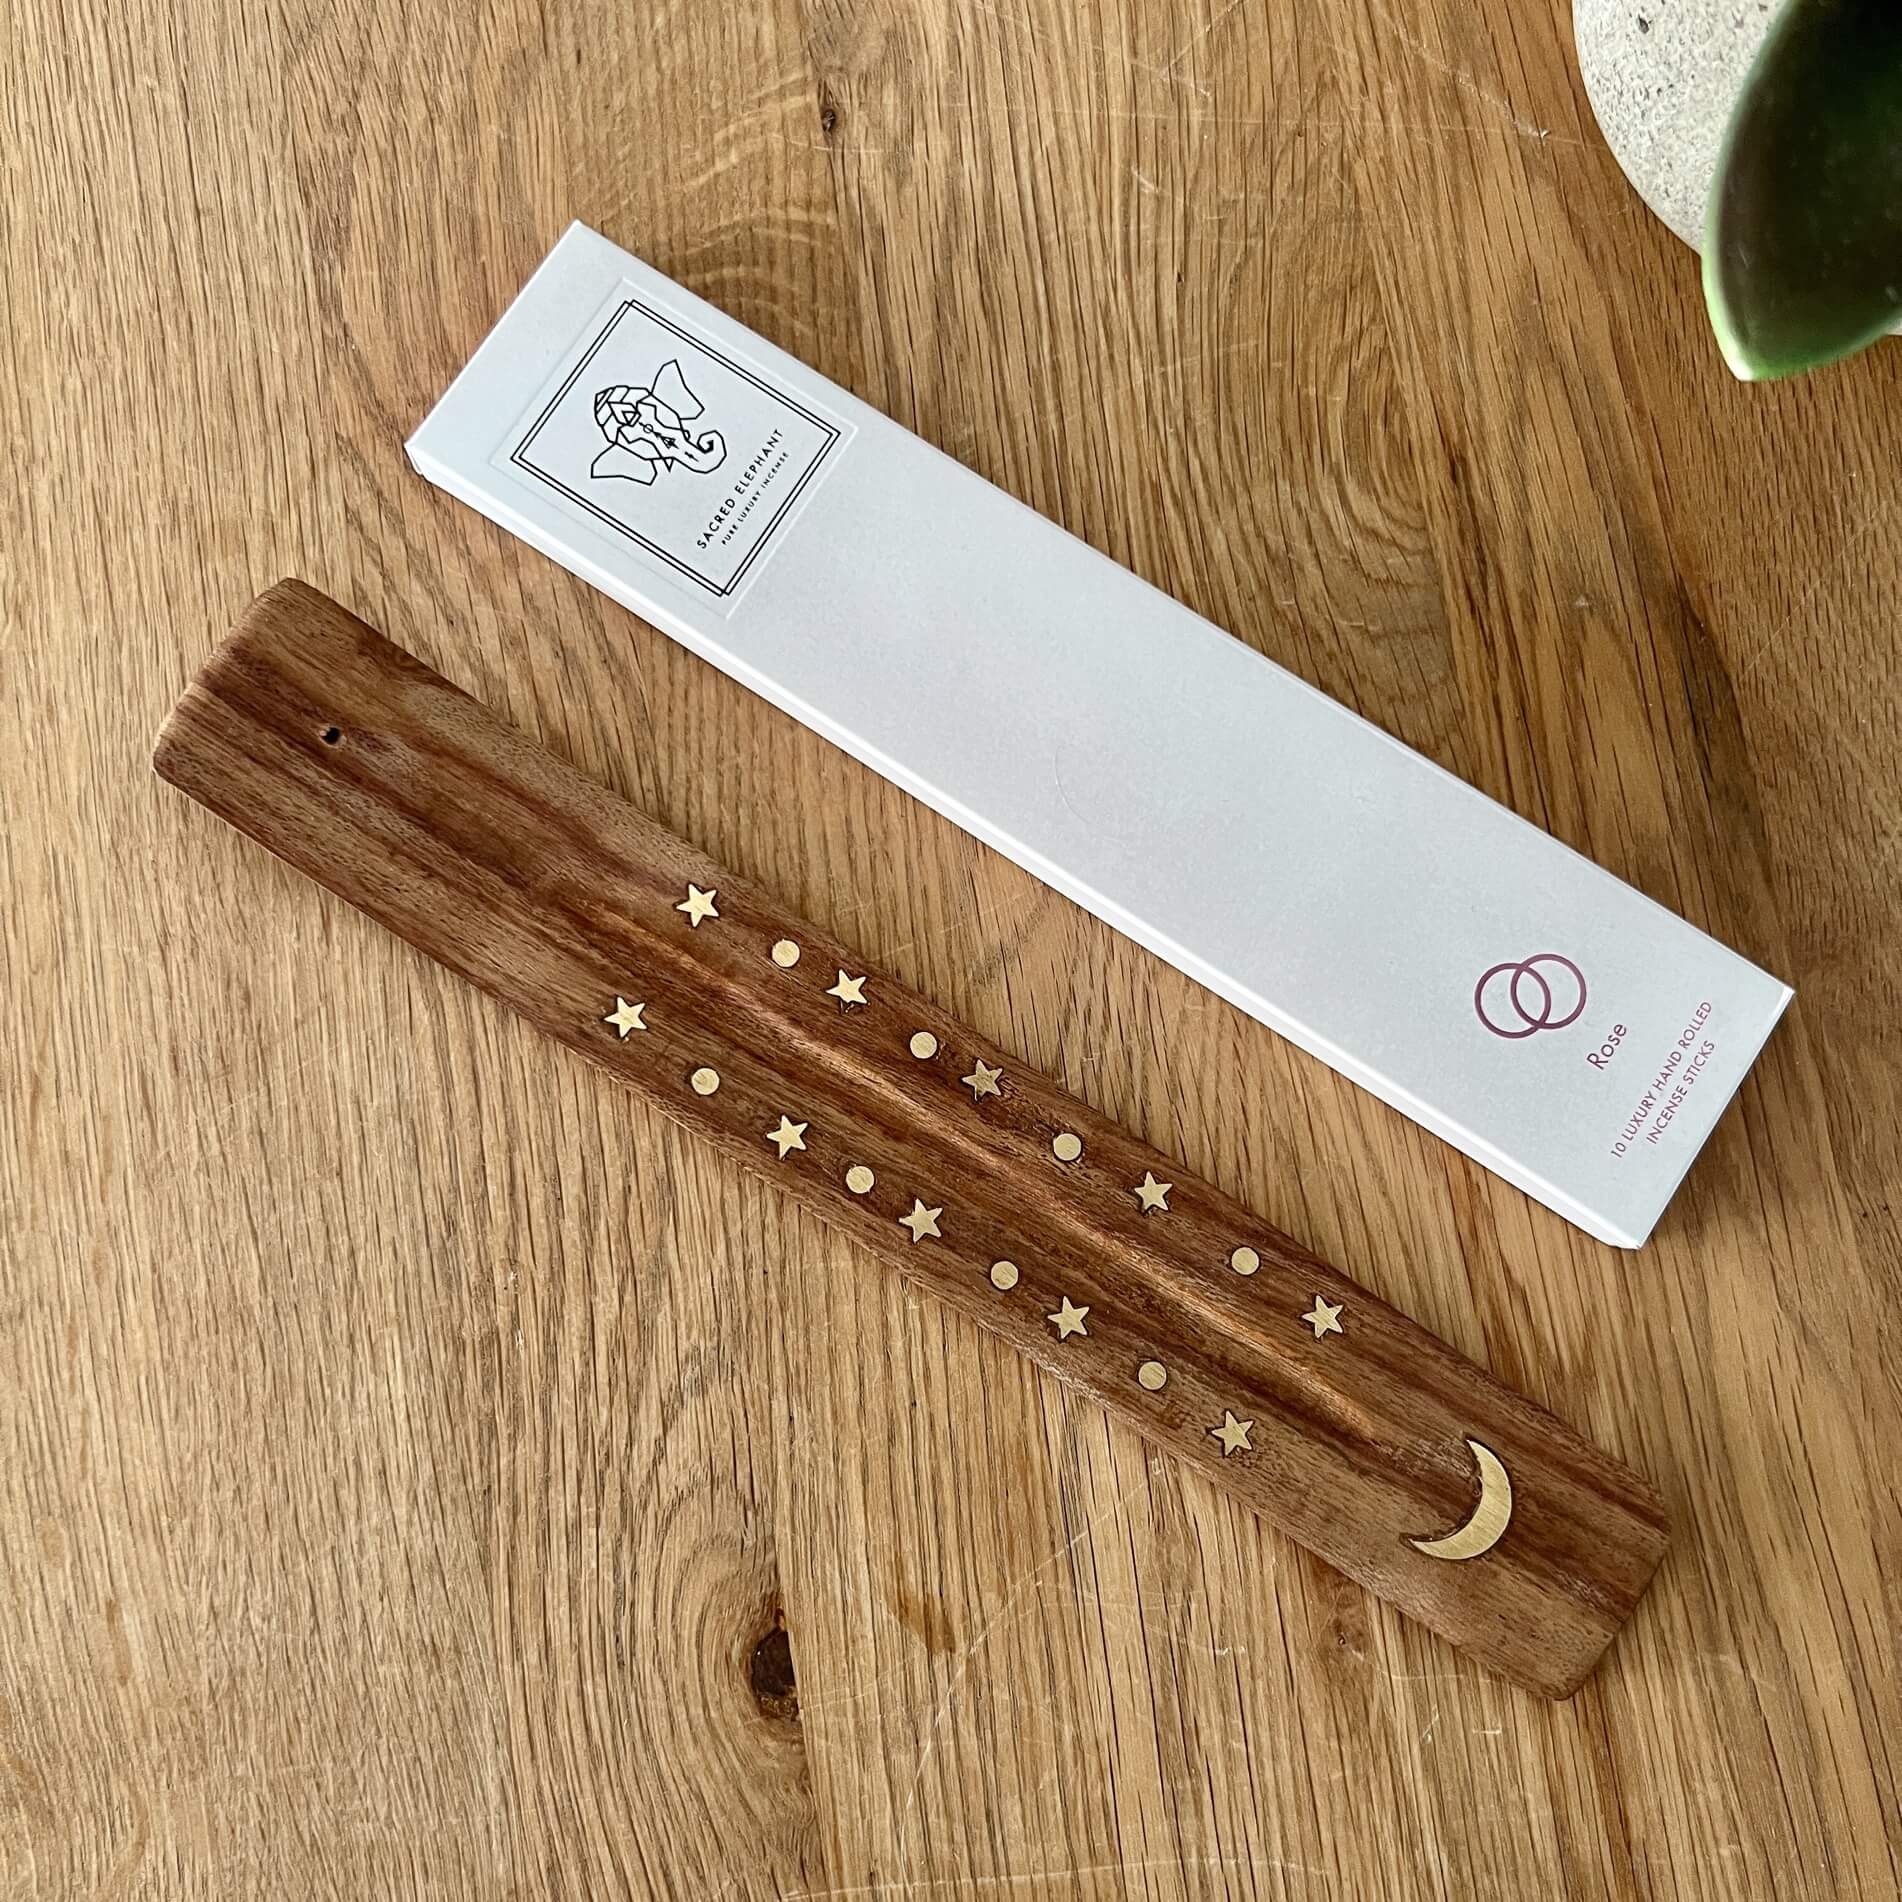 Mango wood ski incense holder with moon and star brass inlaid with a white packet of Sacred Elephant Rose Incense sticks